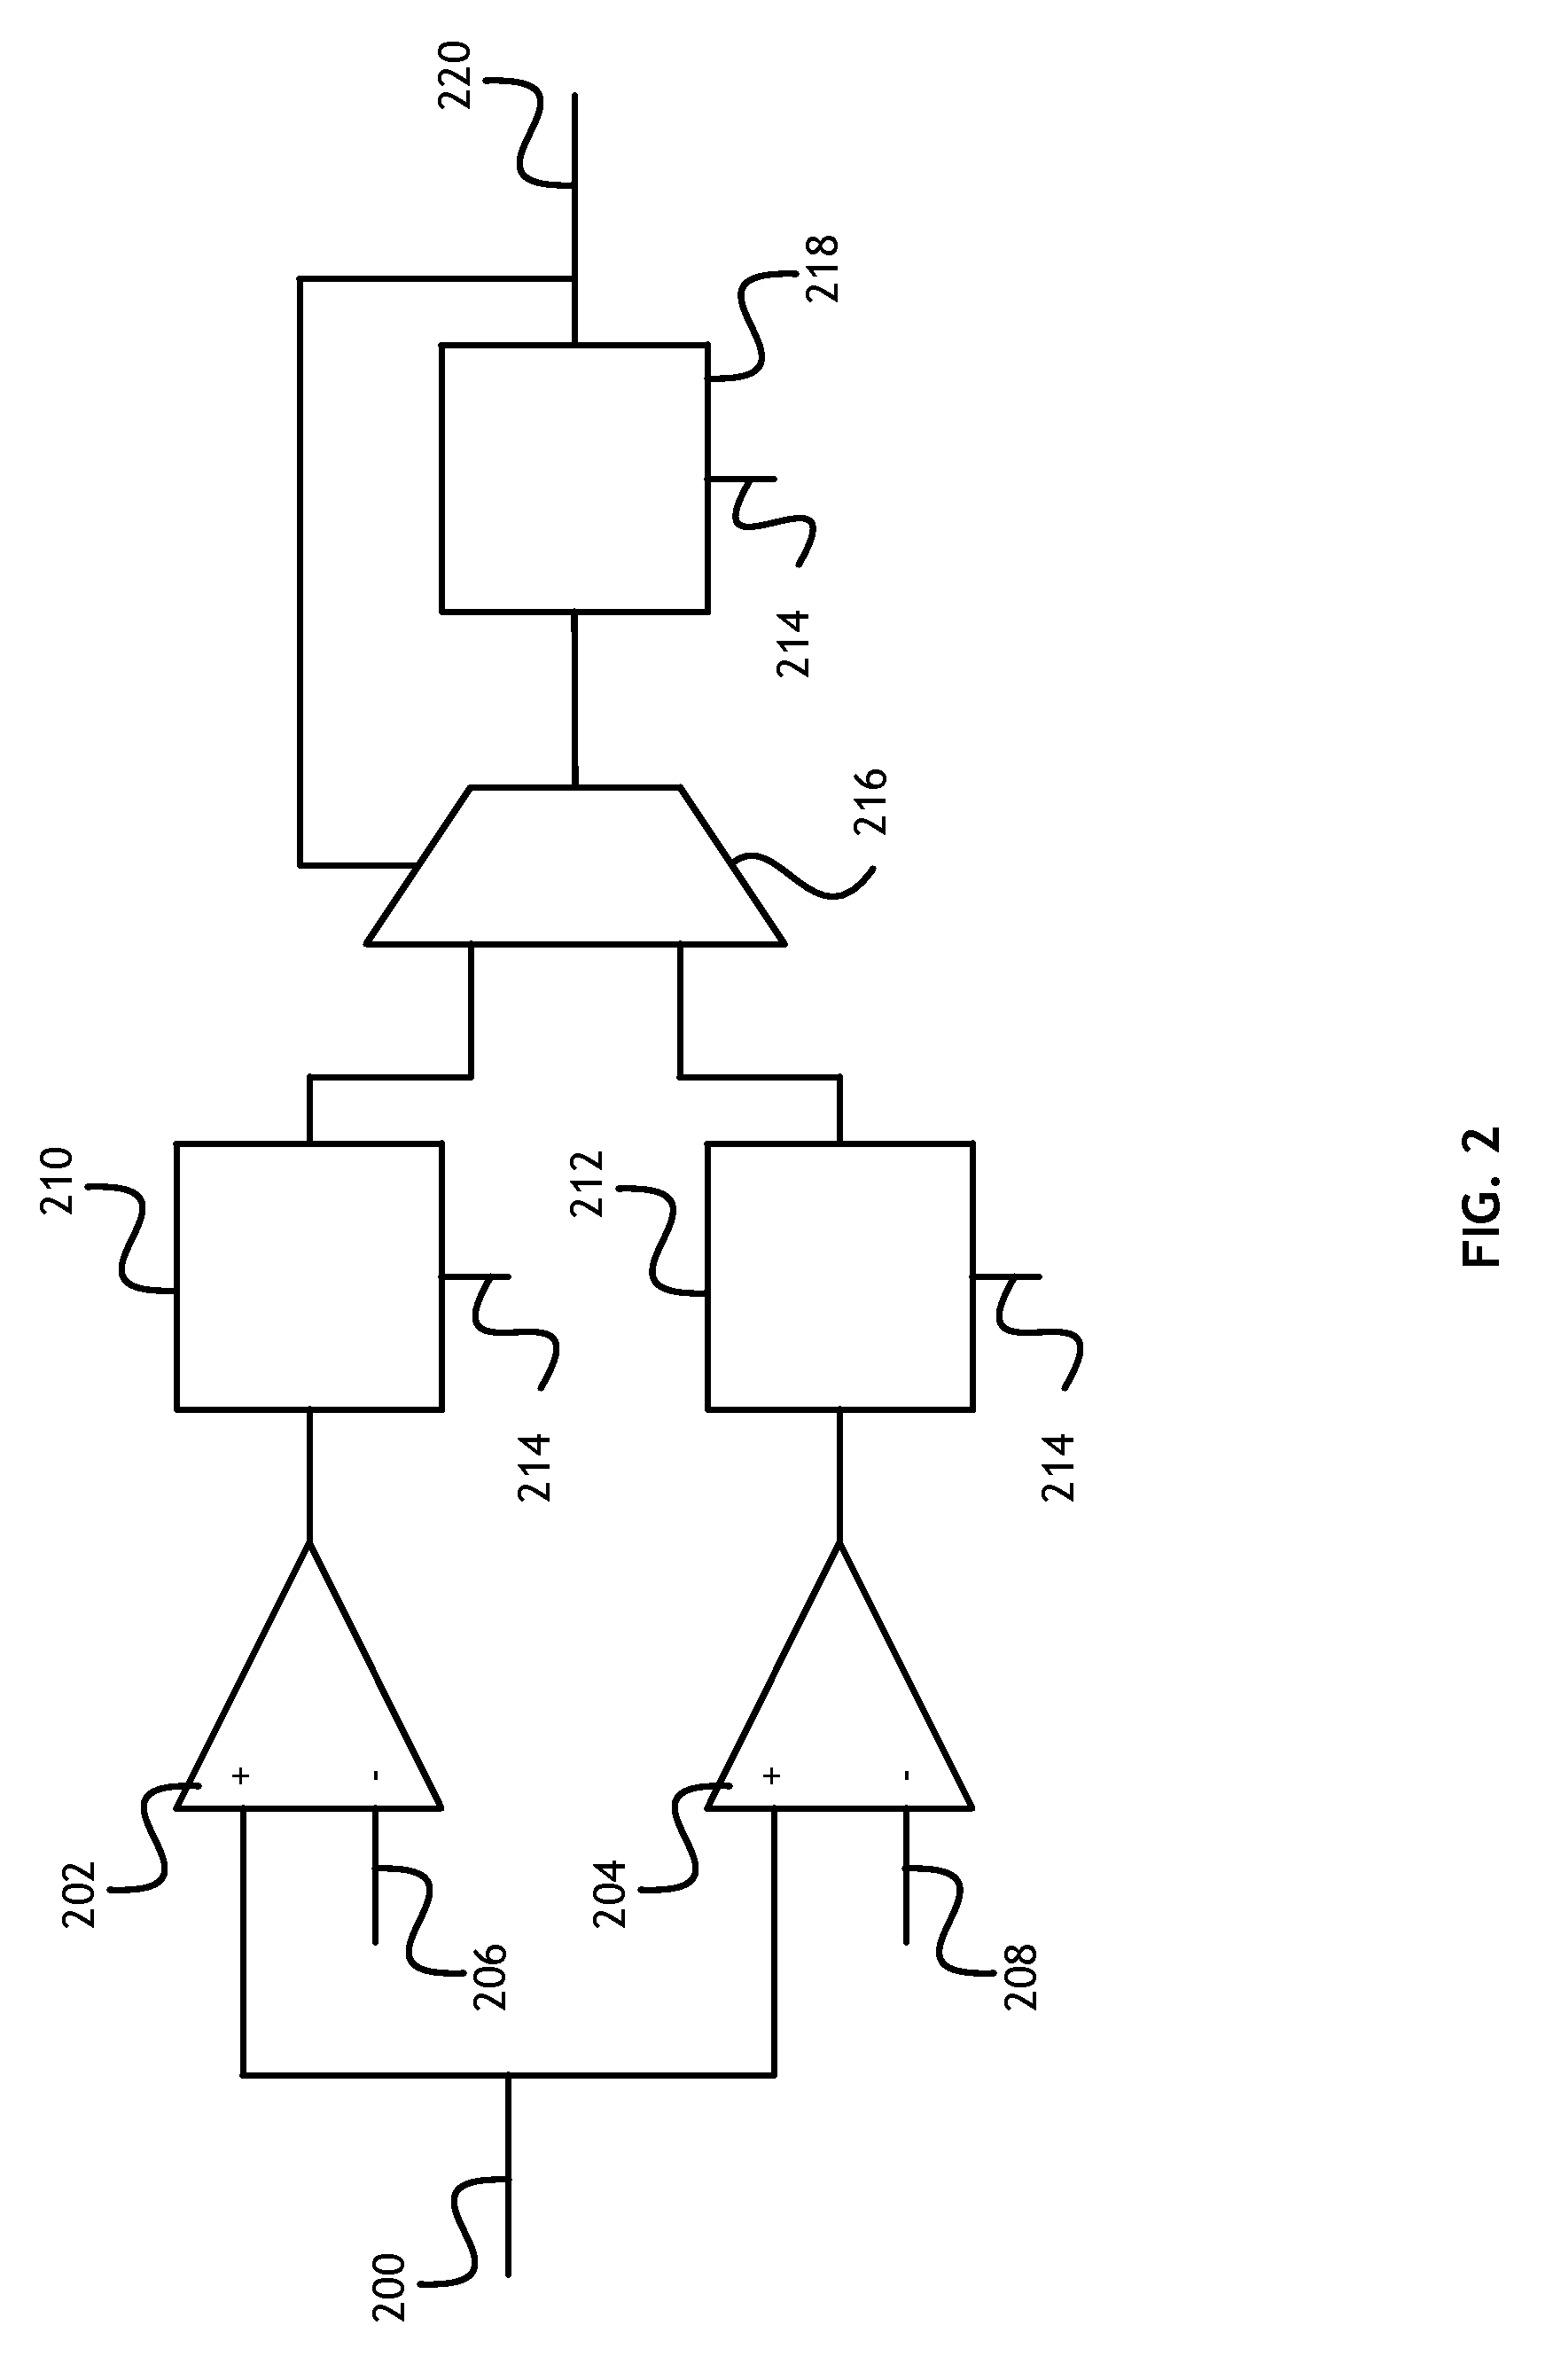 Pipelined decision feedback equalization in an interleaved serializer/deserializer receiver